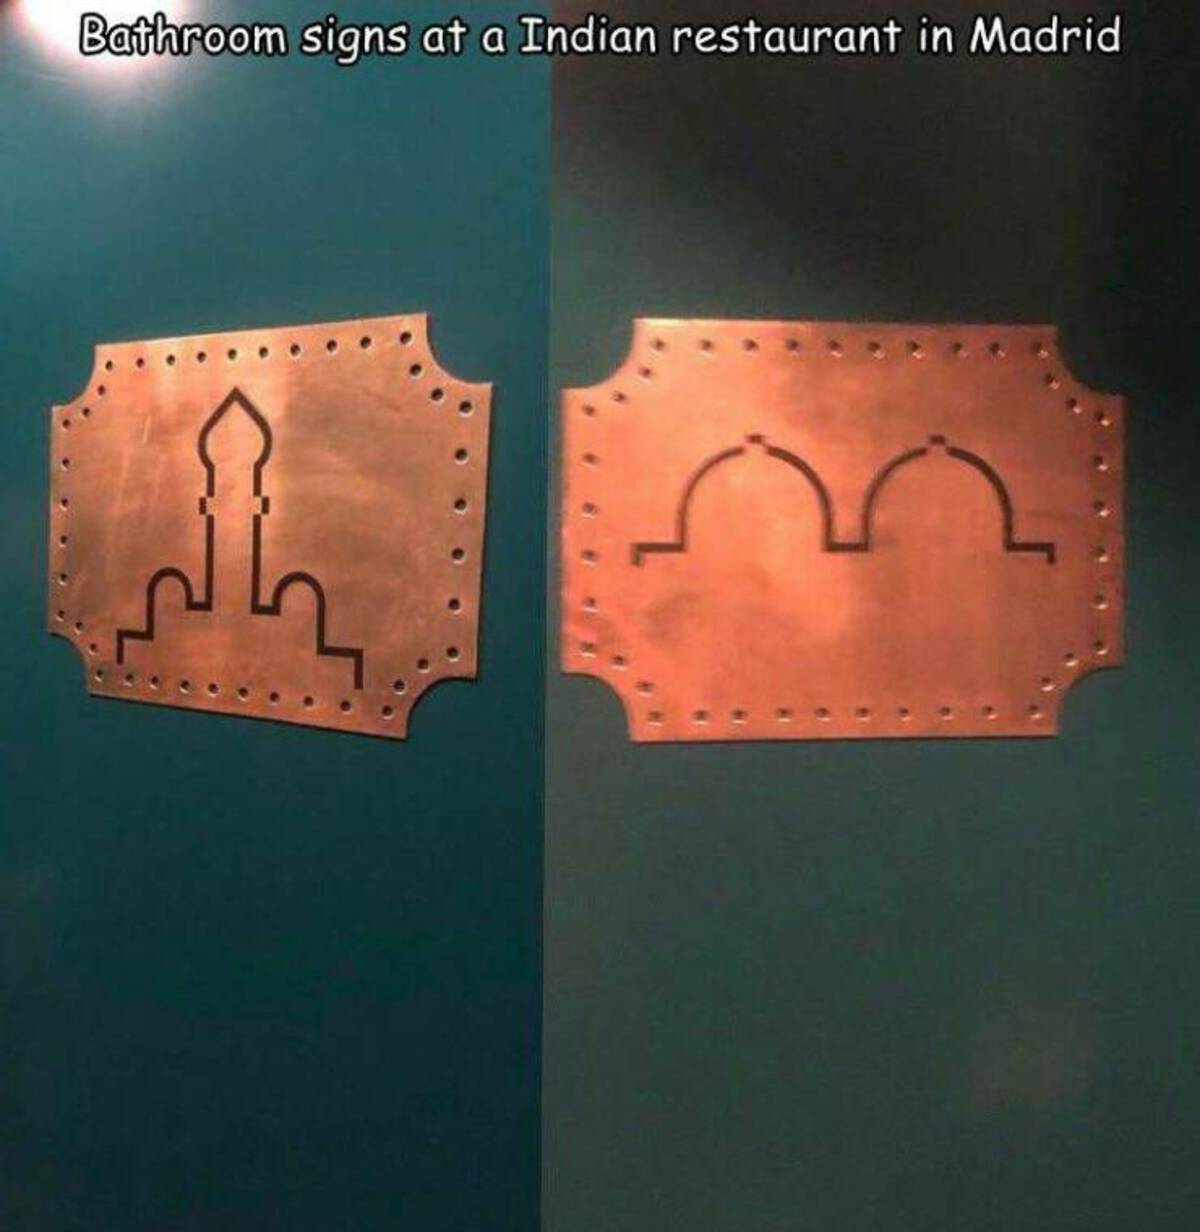 bathroom sign for restaurant - Bathroom signs at a Indian restaurant in Madrid